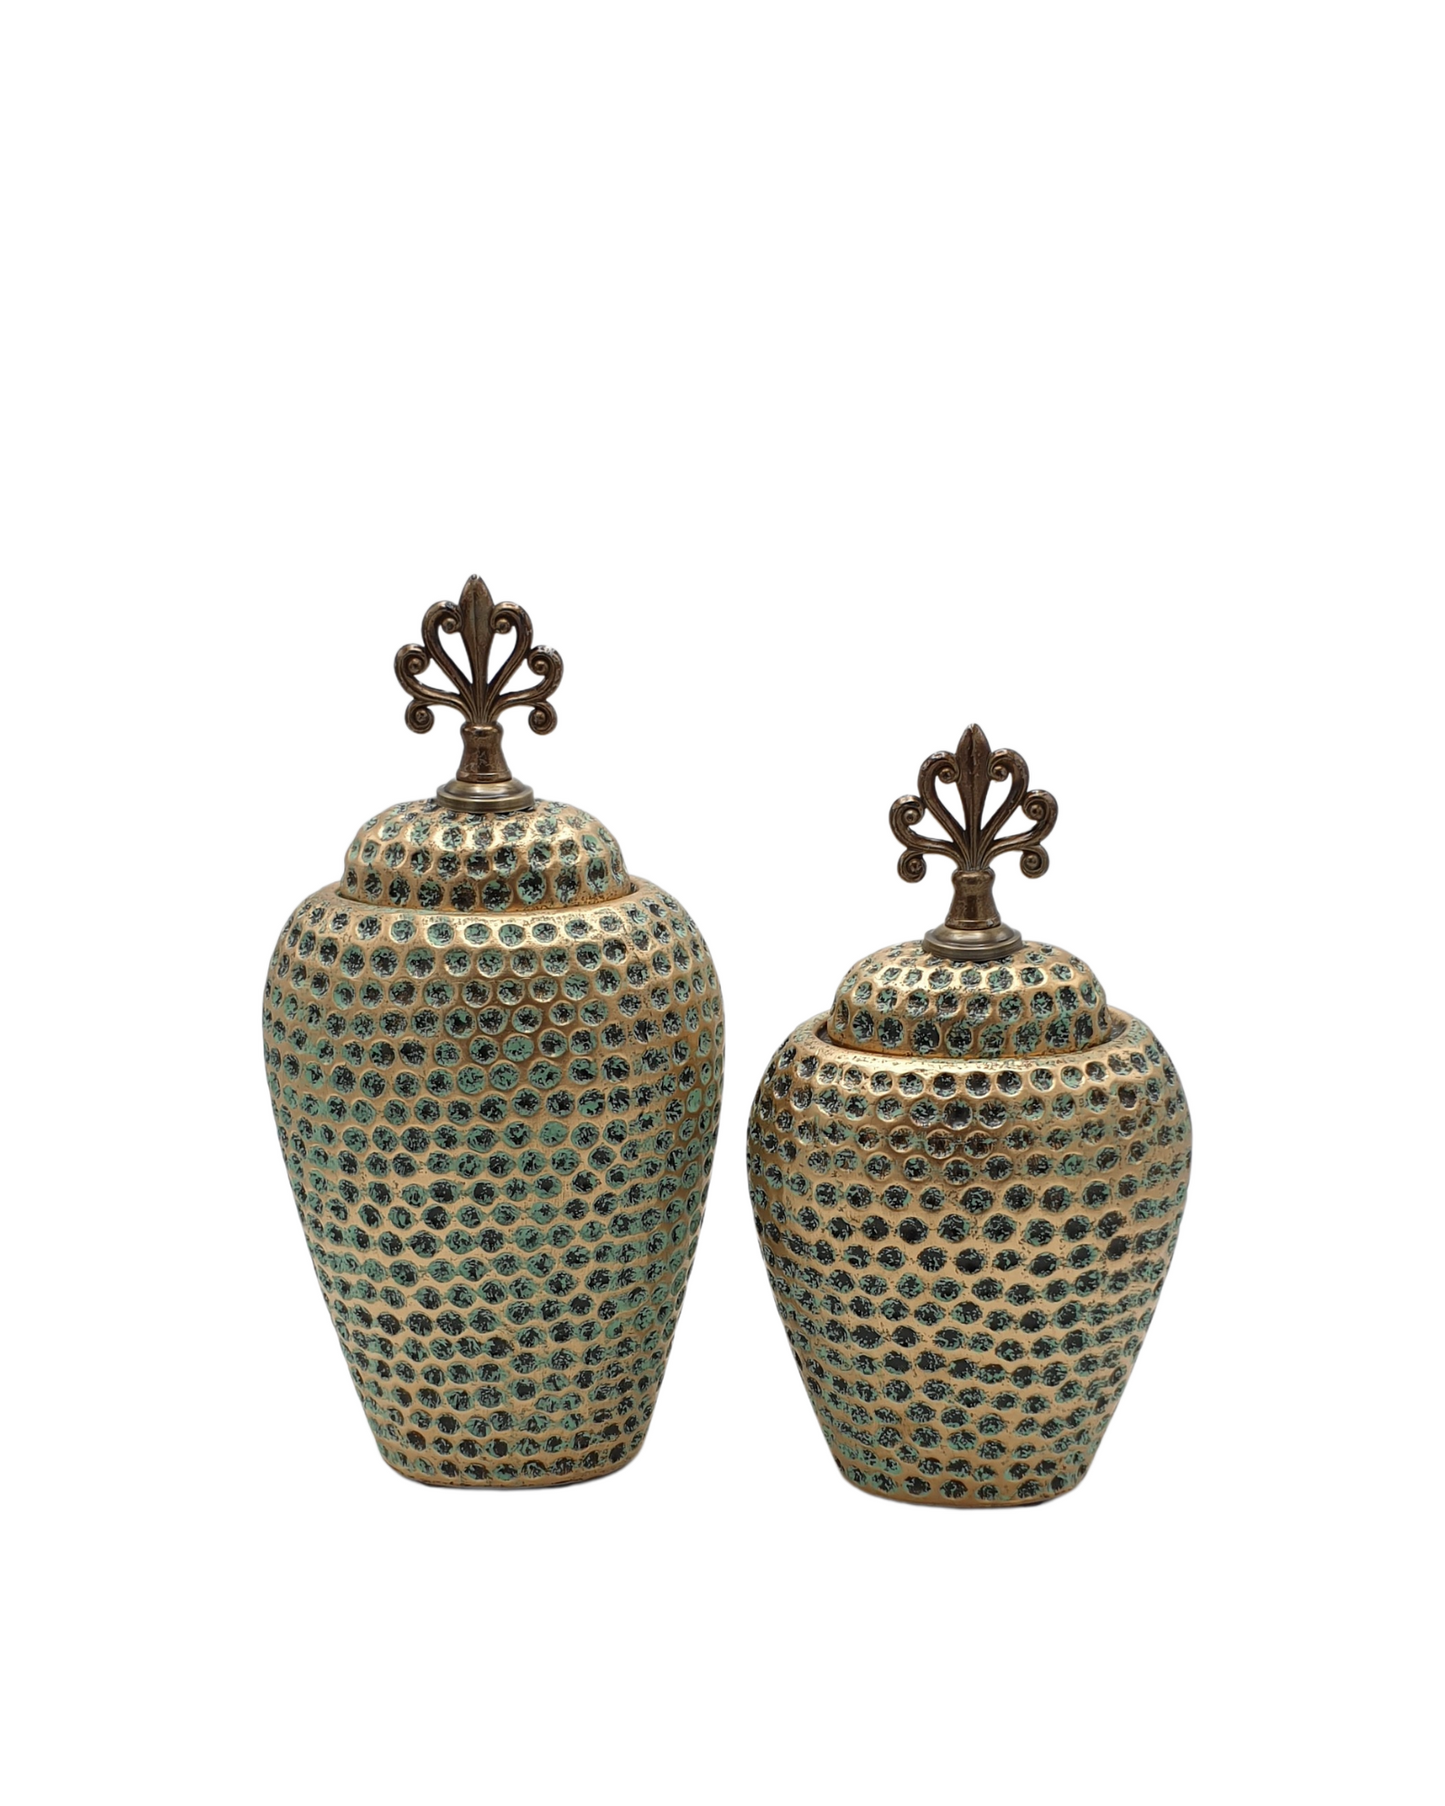 Golden & Green Urn - Available in 2 Sizes